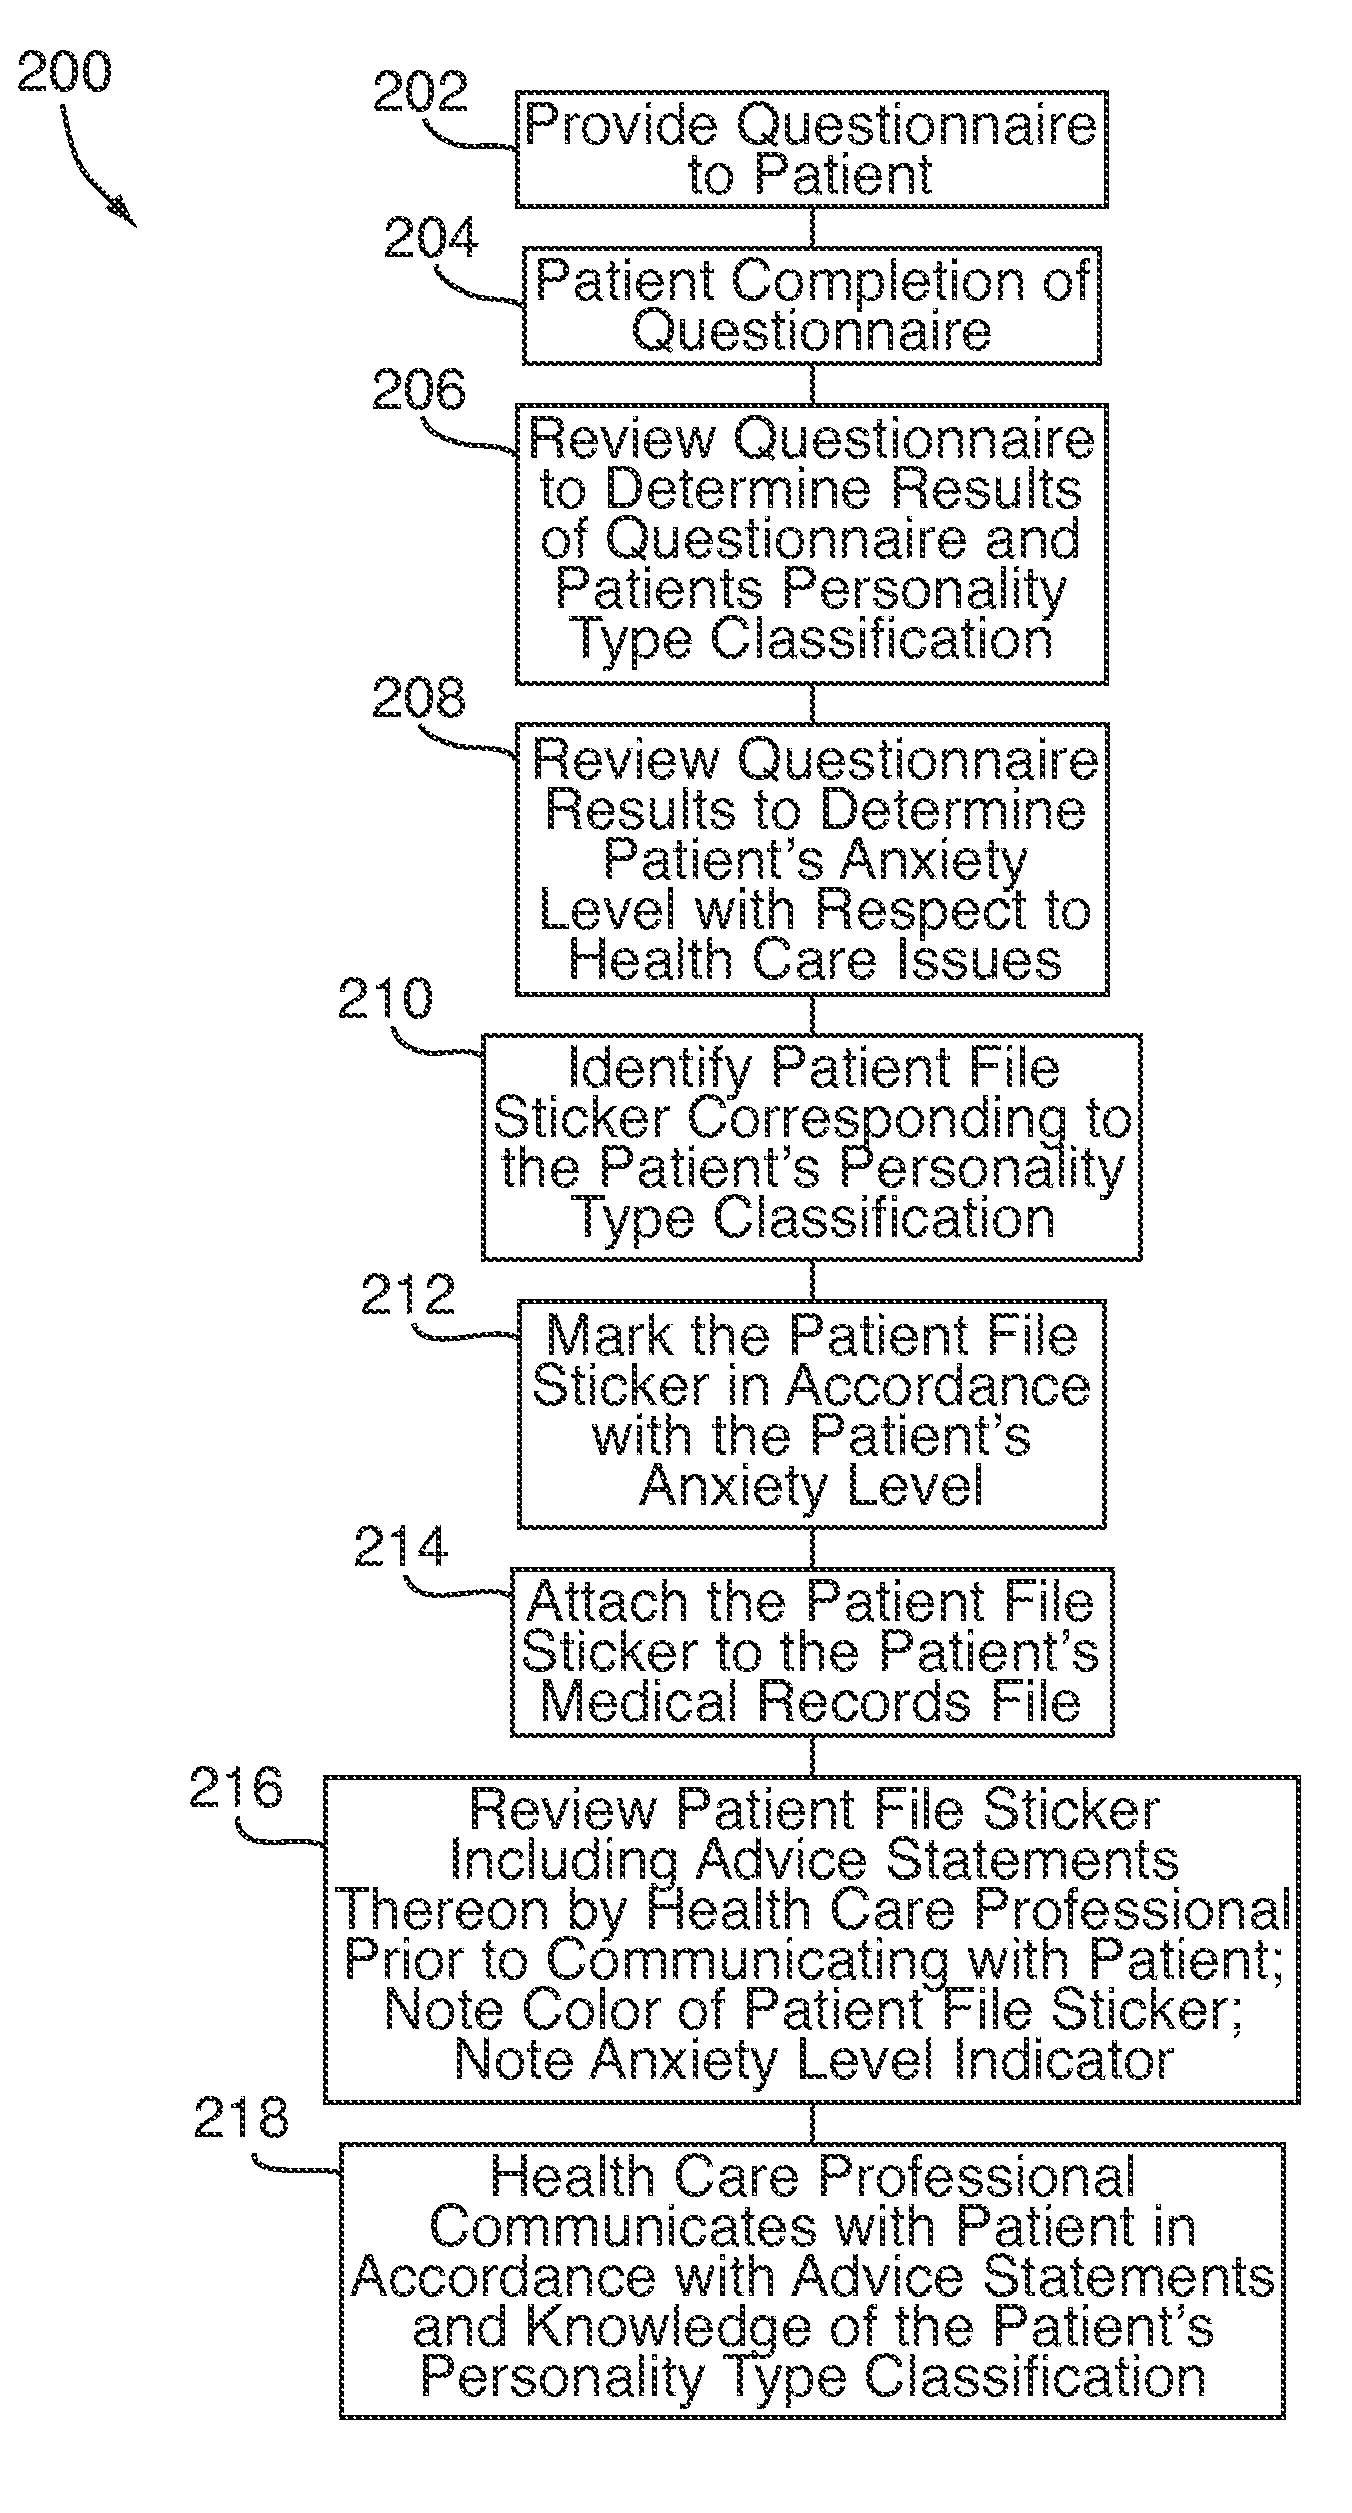 System and Method for Improving Communications with a Patient